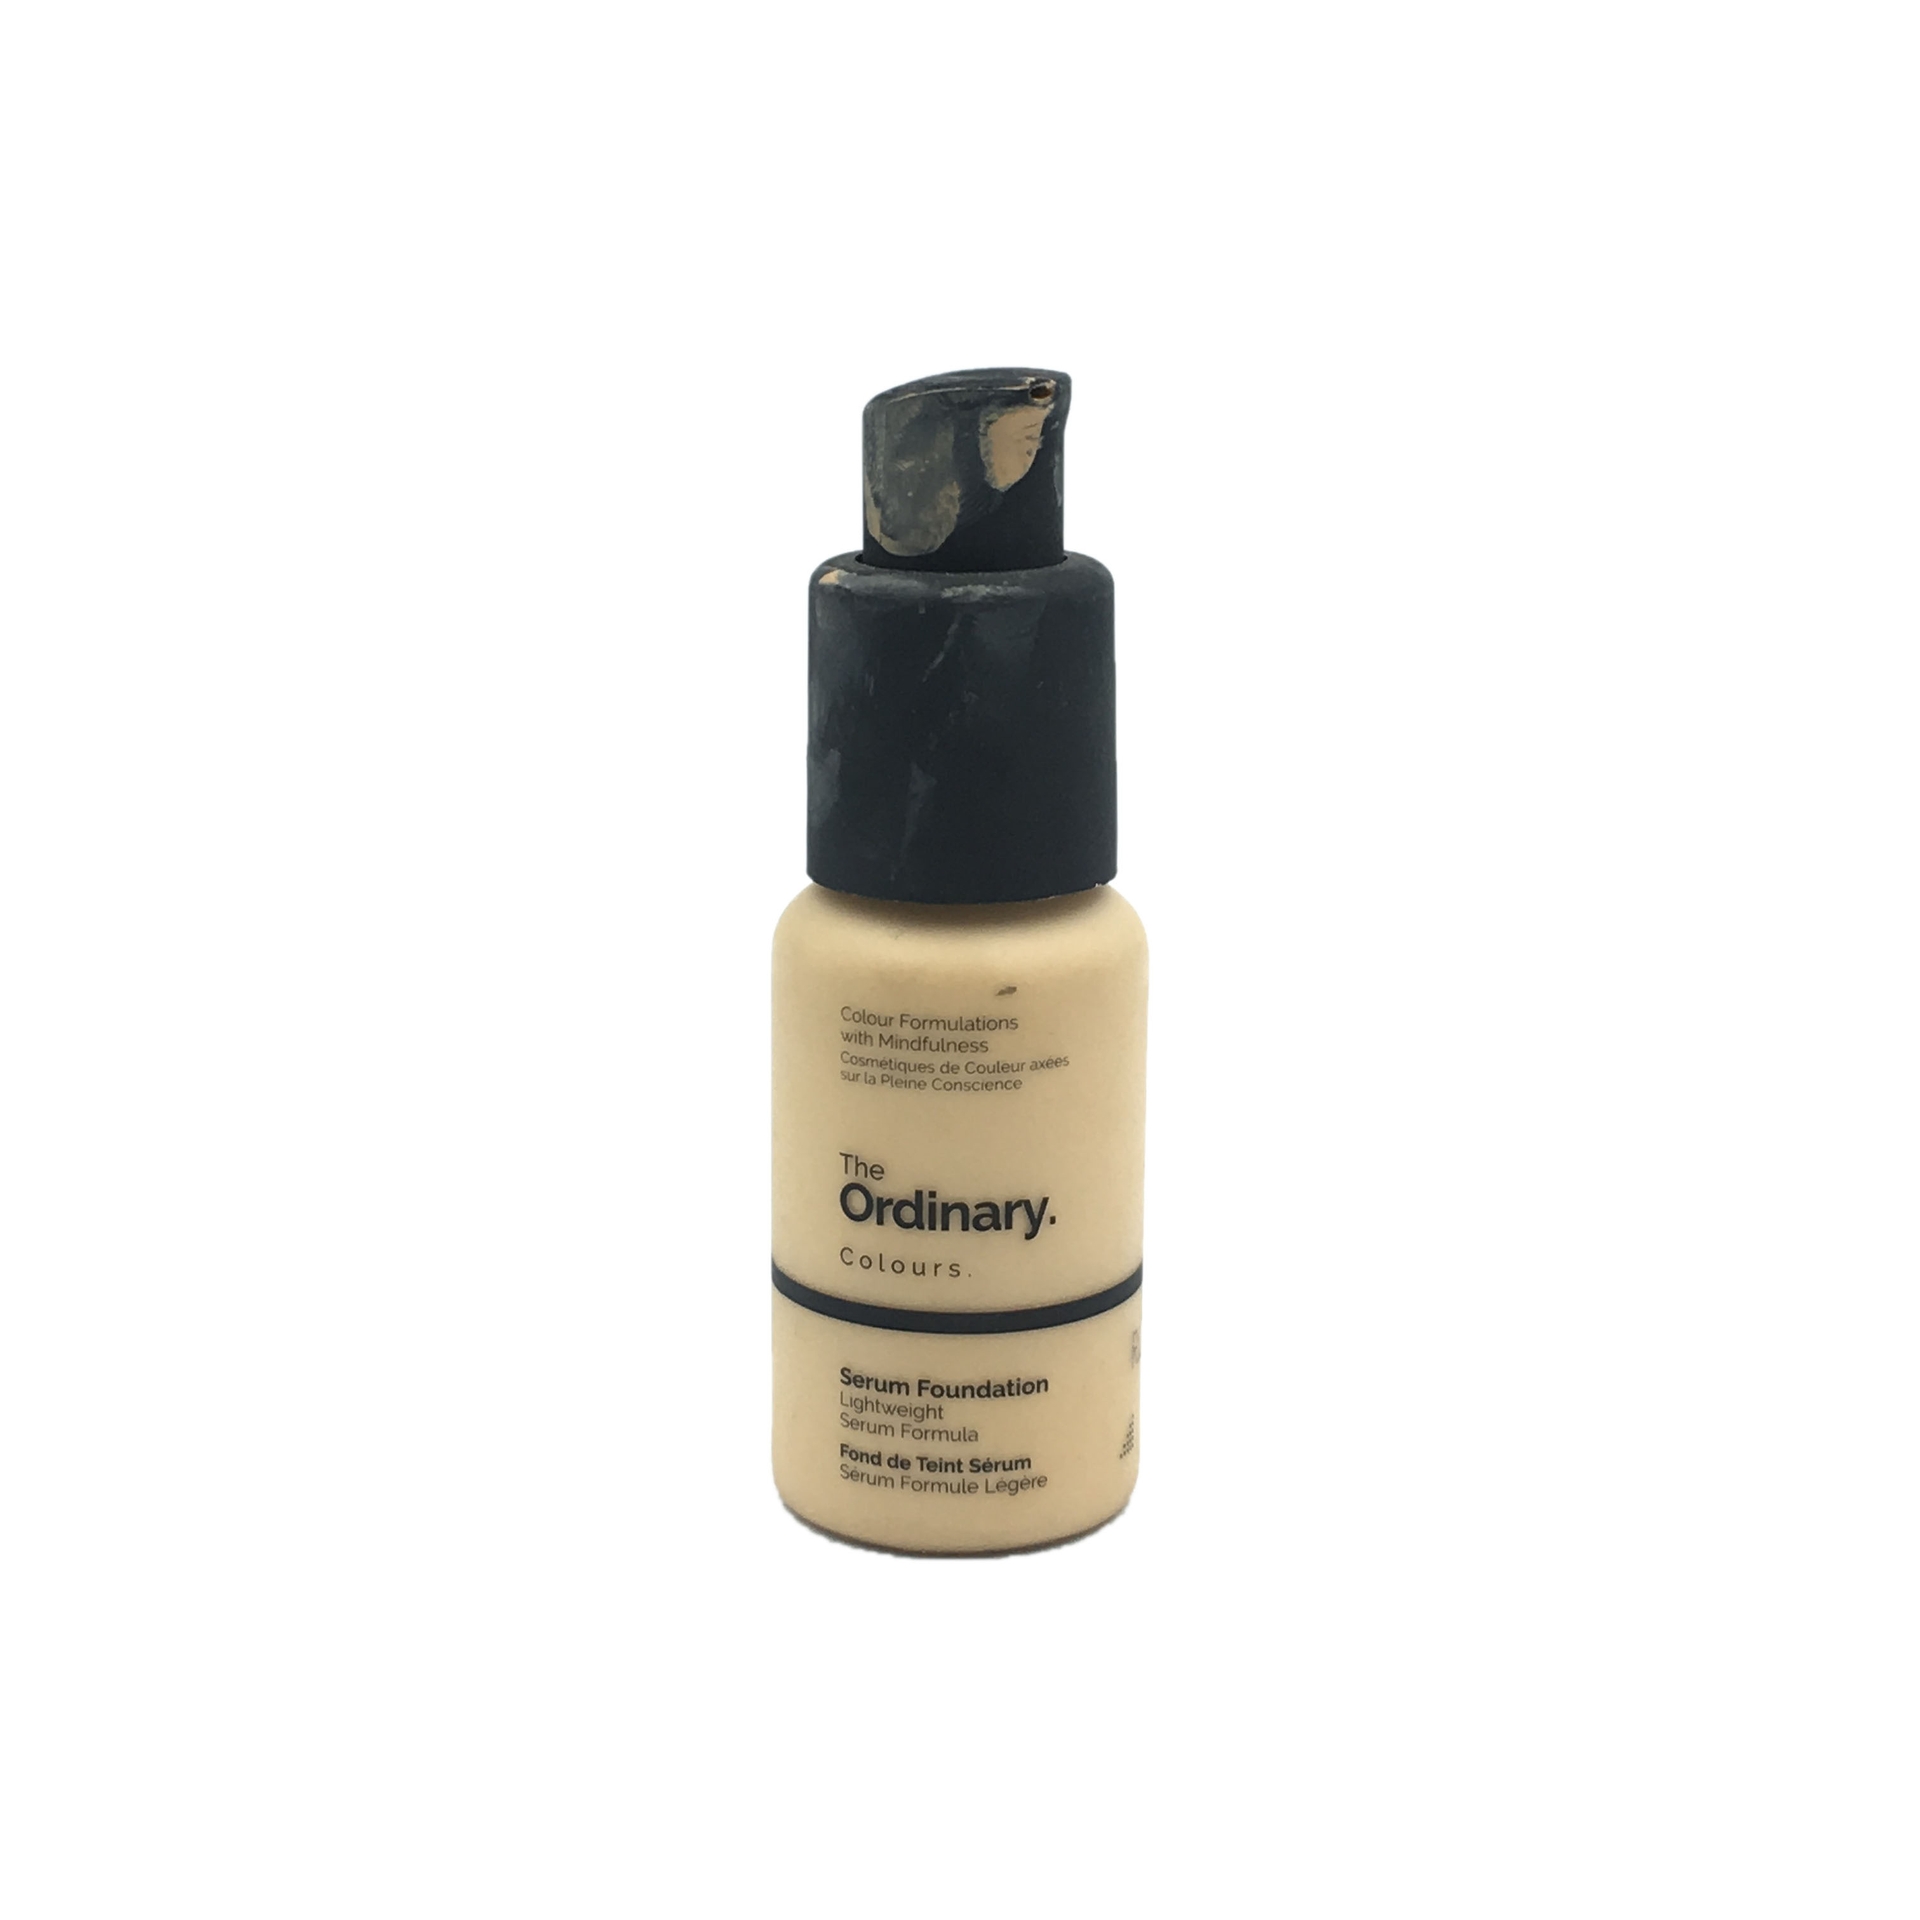 The Ordinary Colours Serum Foundation Shade 1.2 Y Light Yellow Undertones Faces